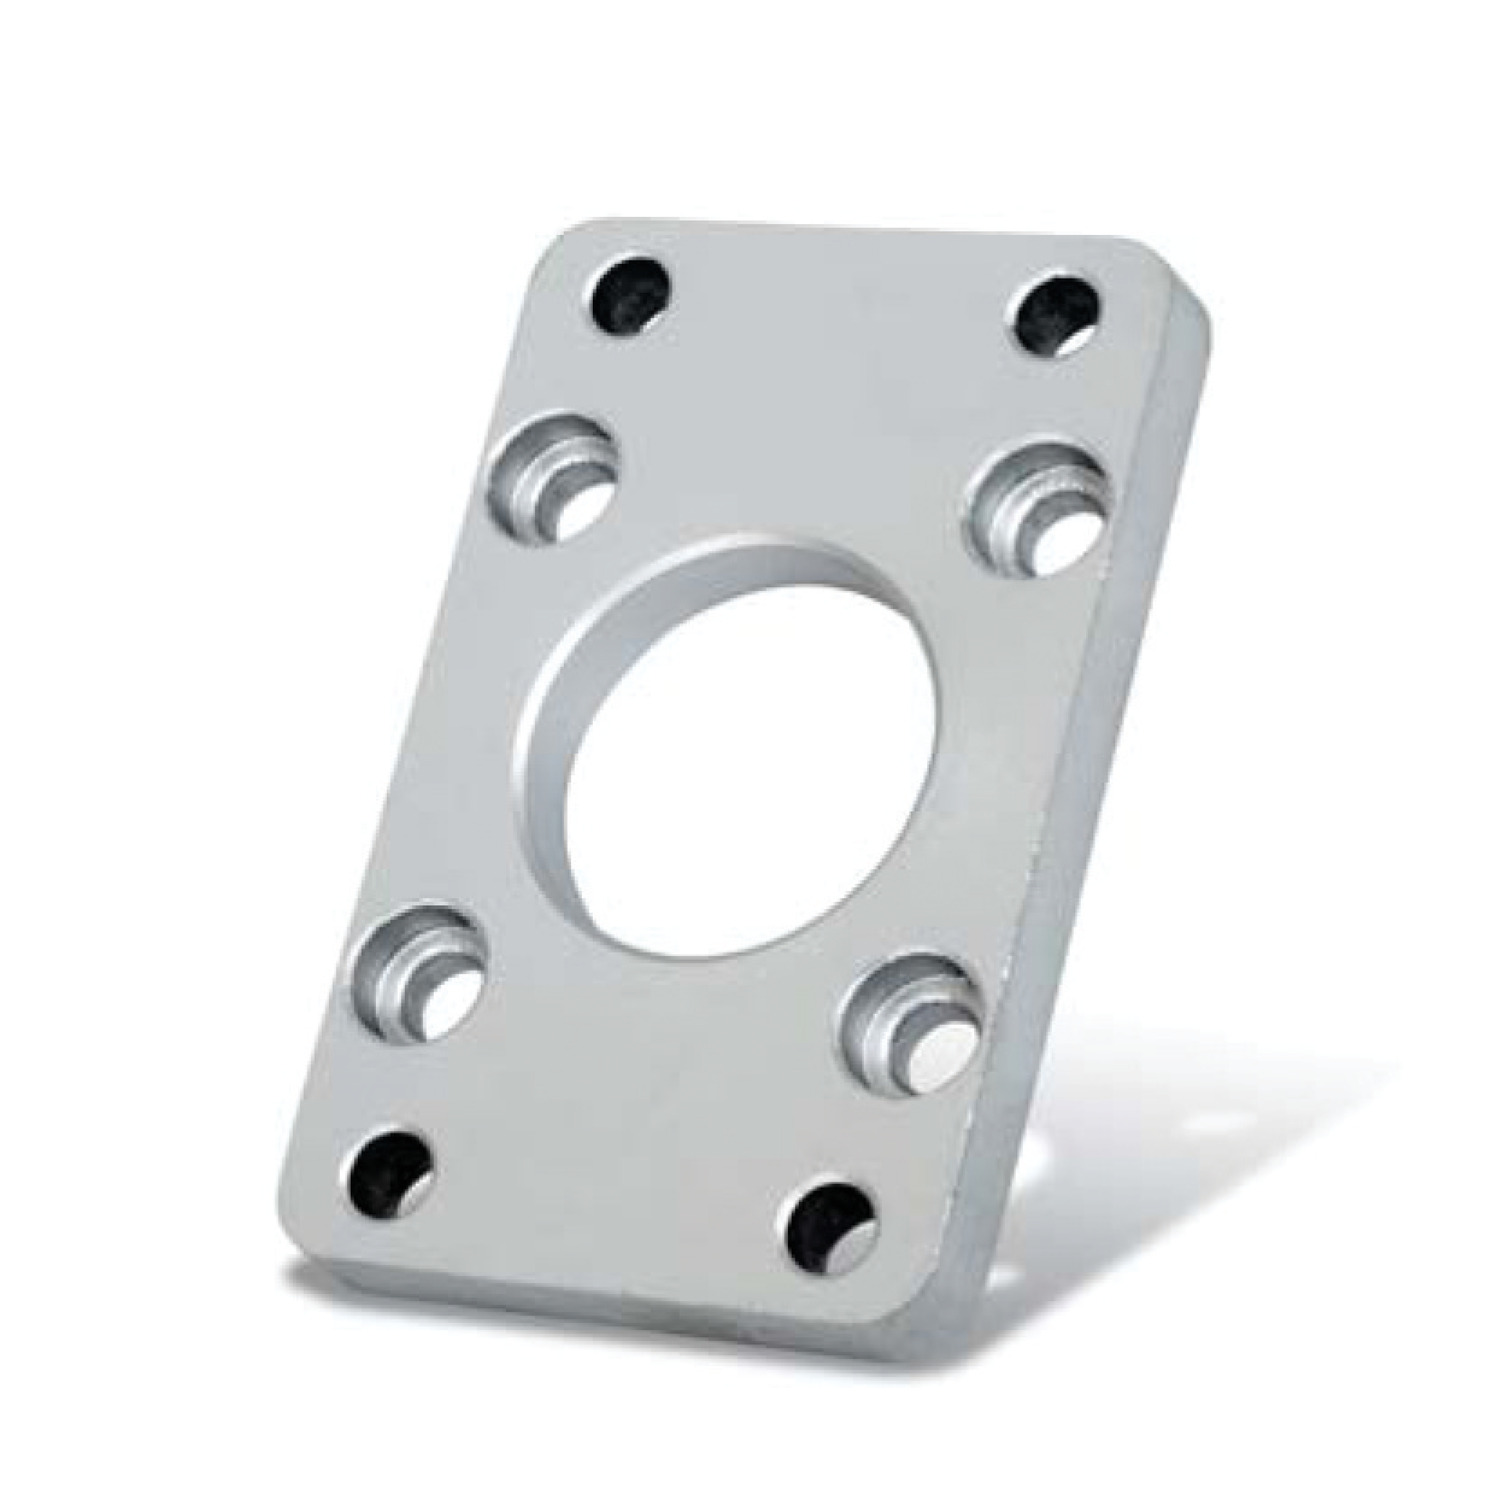 Product L4814, Air Cylinder Mounts - CETOP Series mounting flange / 